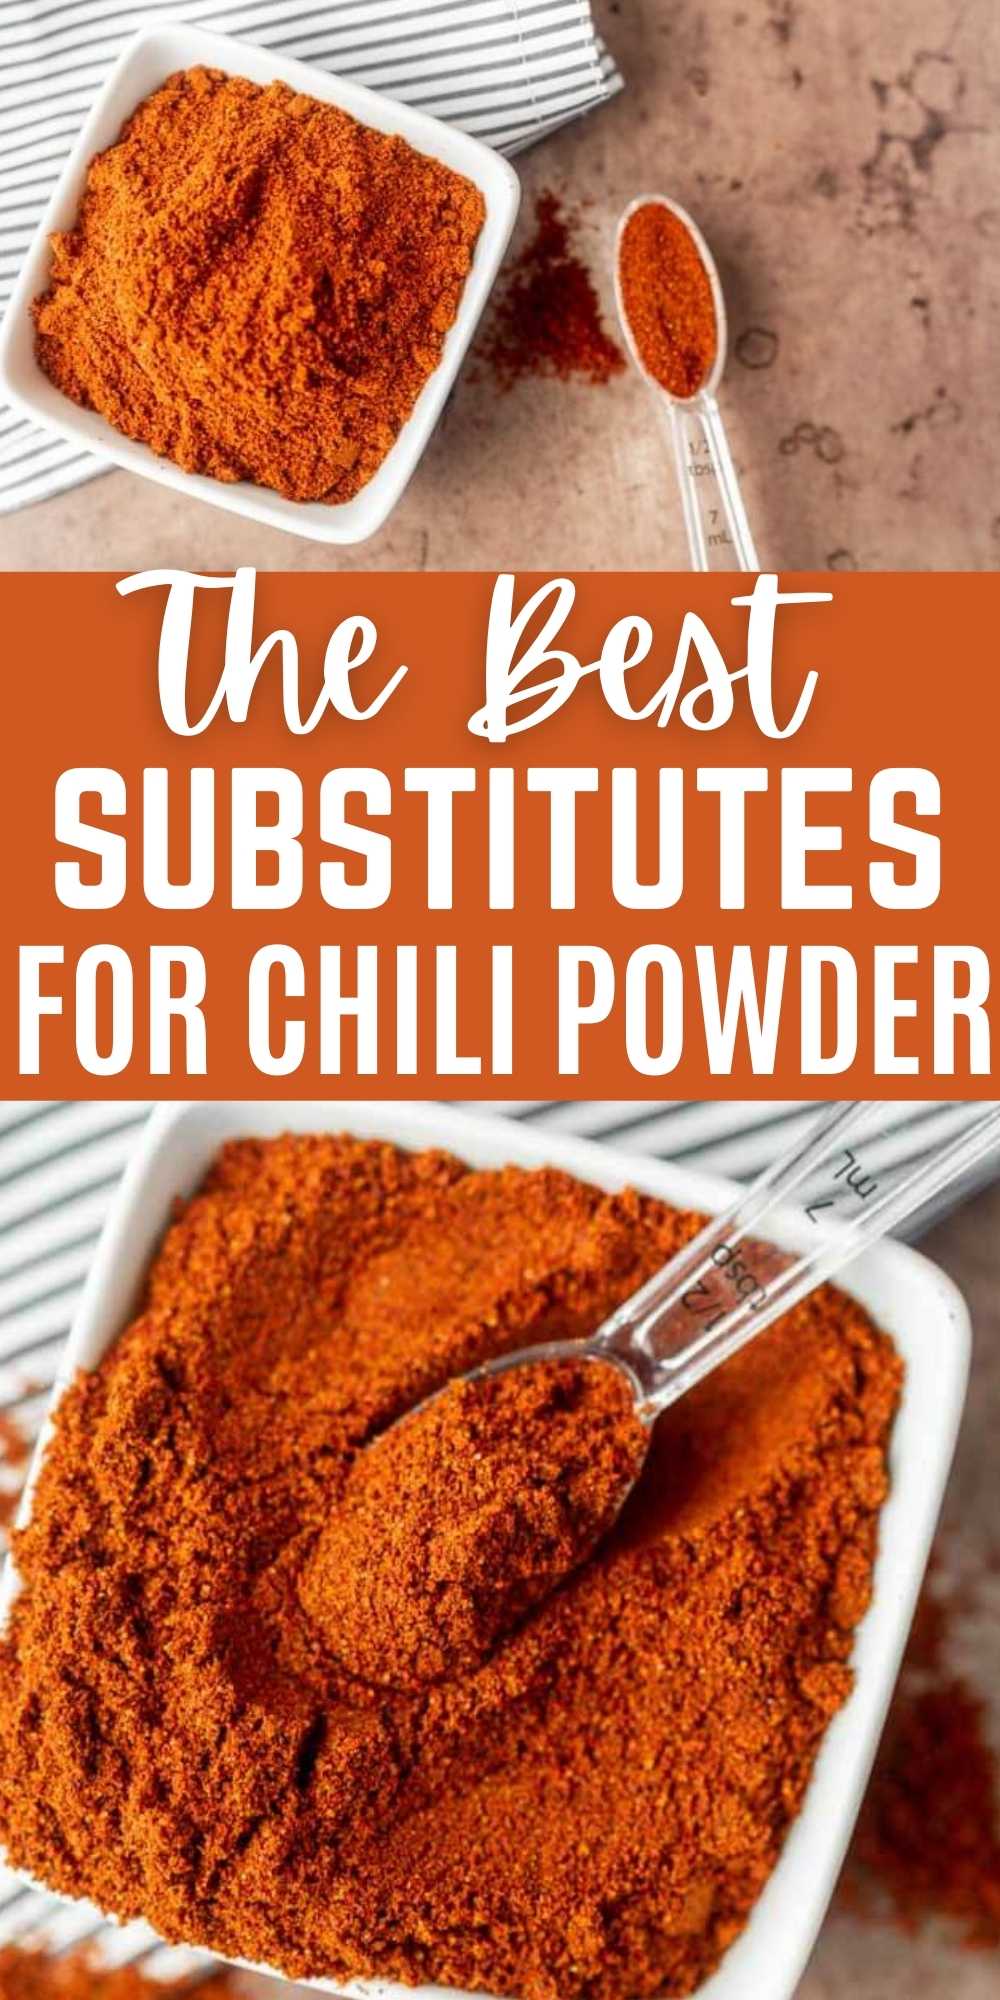 If you are out of chili powder, here are The Best Chili Powder Substitutes. These ideas will help you put the spice back into your recipe. You’ll love these easy hacks for when you’re out of chili powder! #eatingonadime #ingredientsubstitutions #substitutes #chilipowder 
